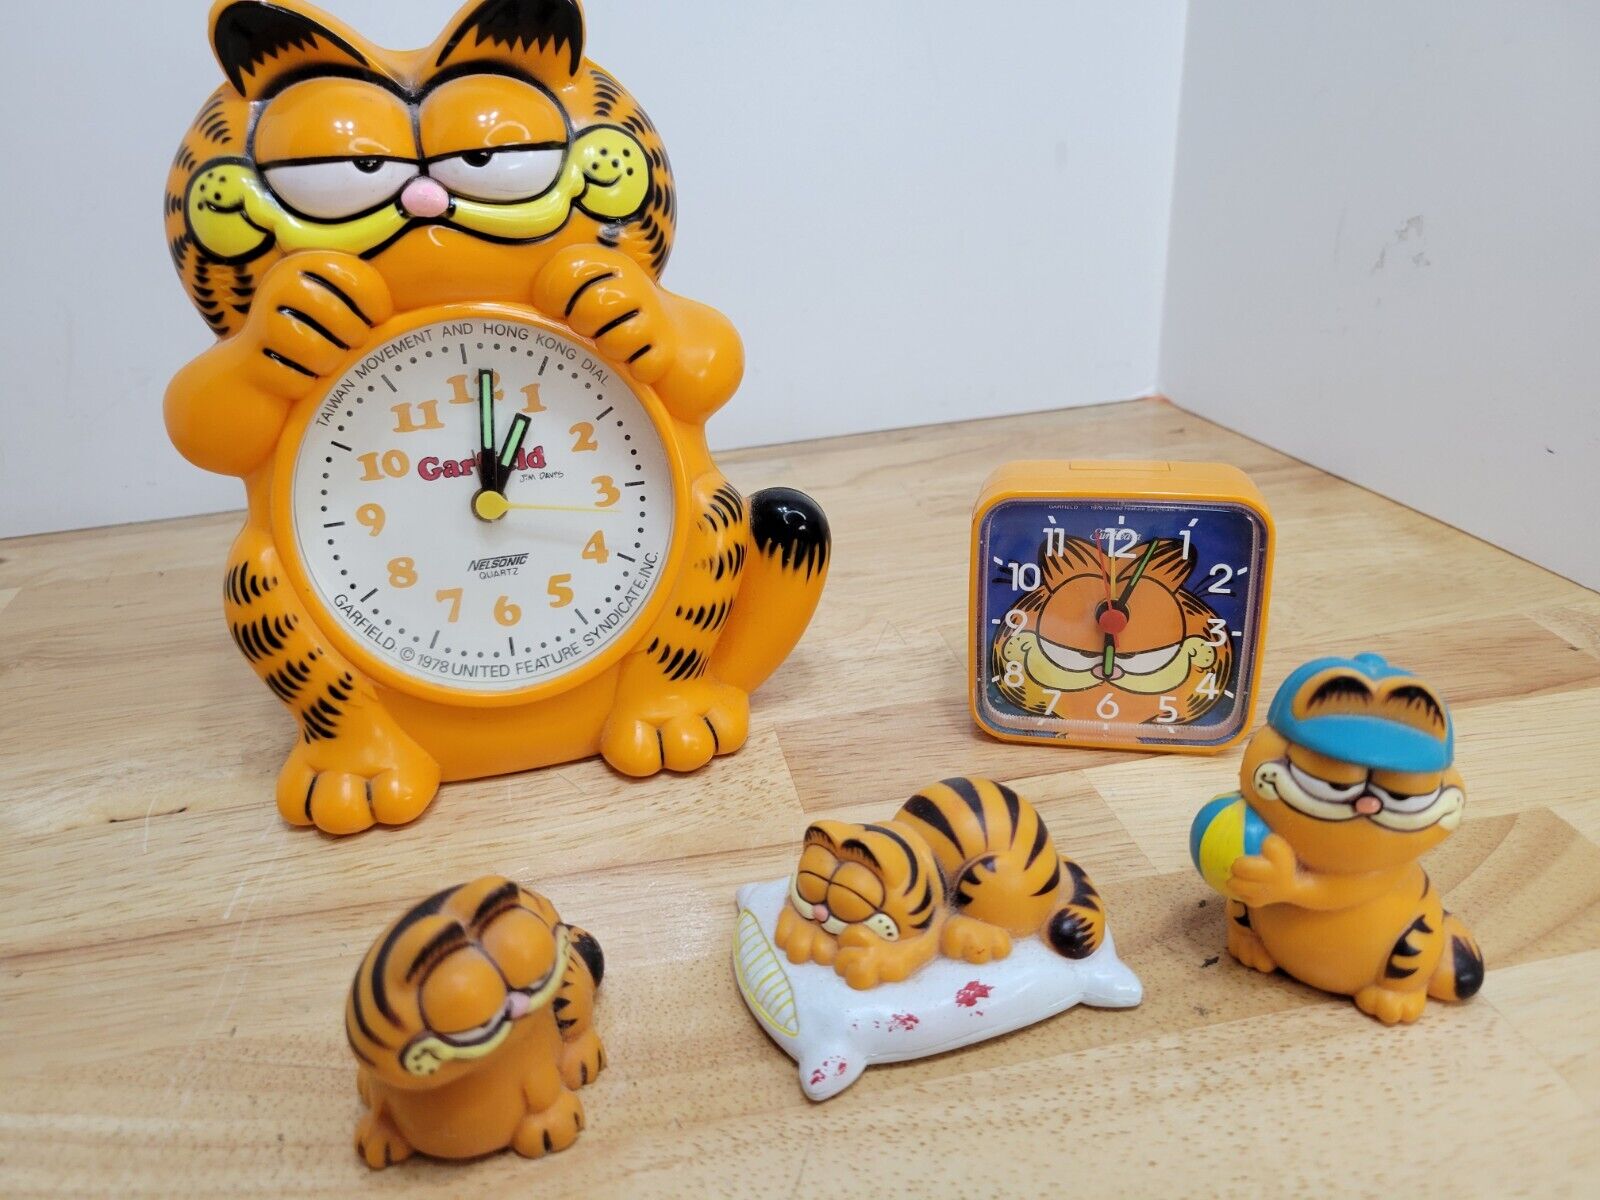 Vintage garfield figure/clock lot 5 pieces total (one clock doesn't work)